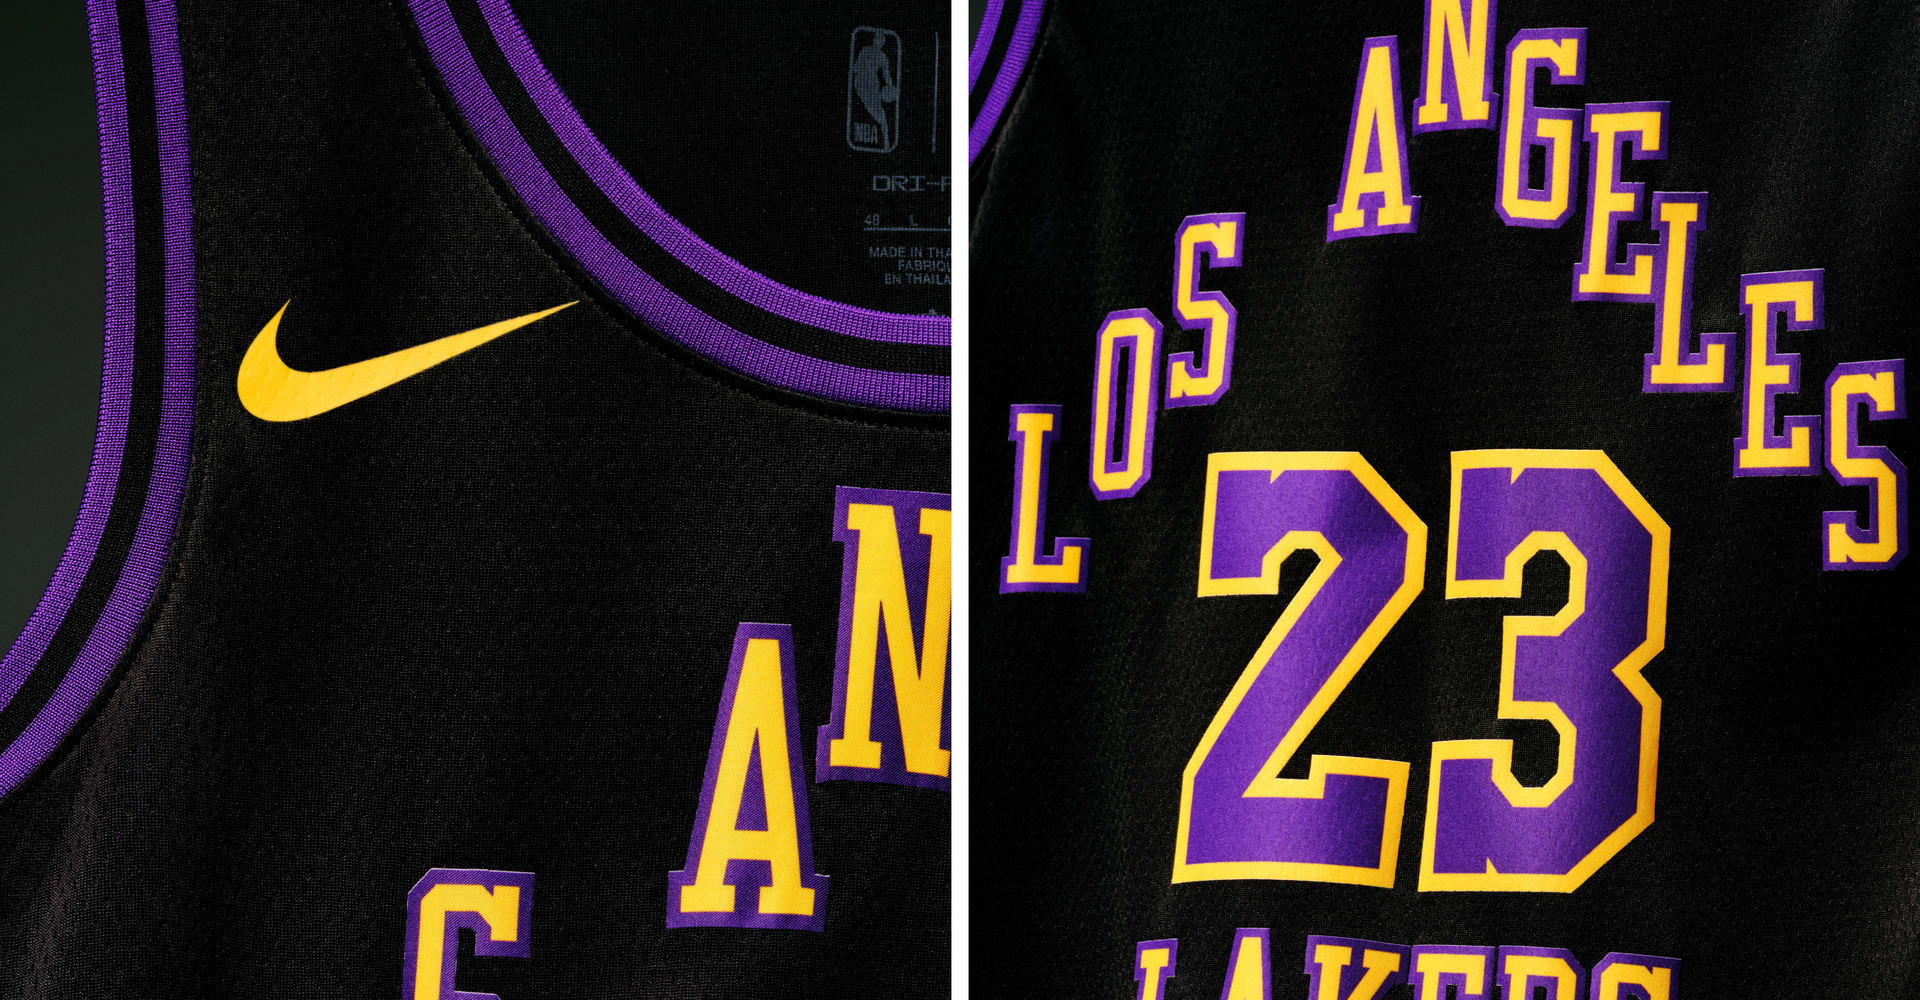 Sportchek nike youth los angeles lakers james city edition replica